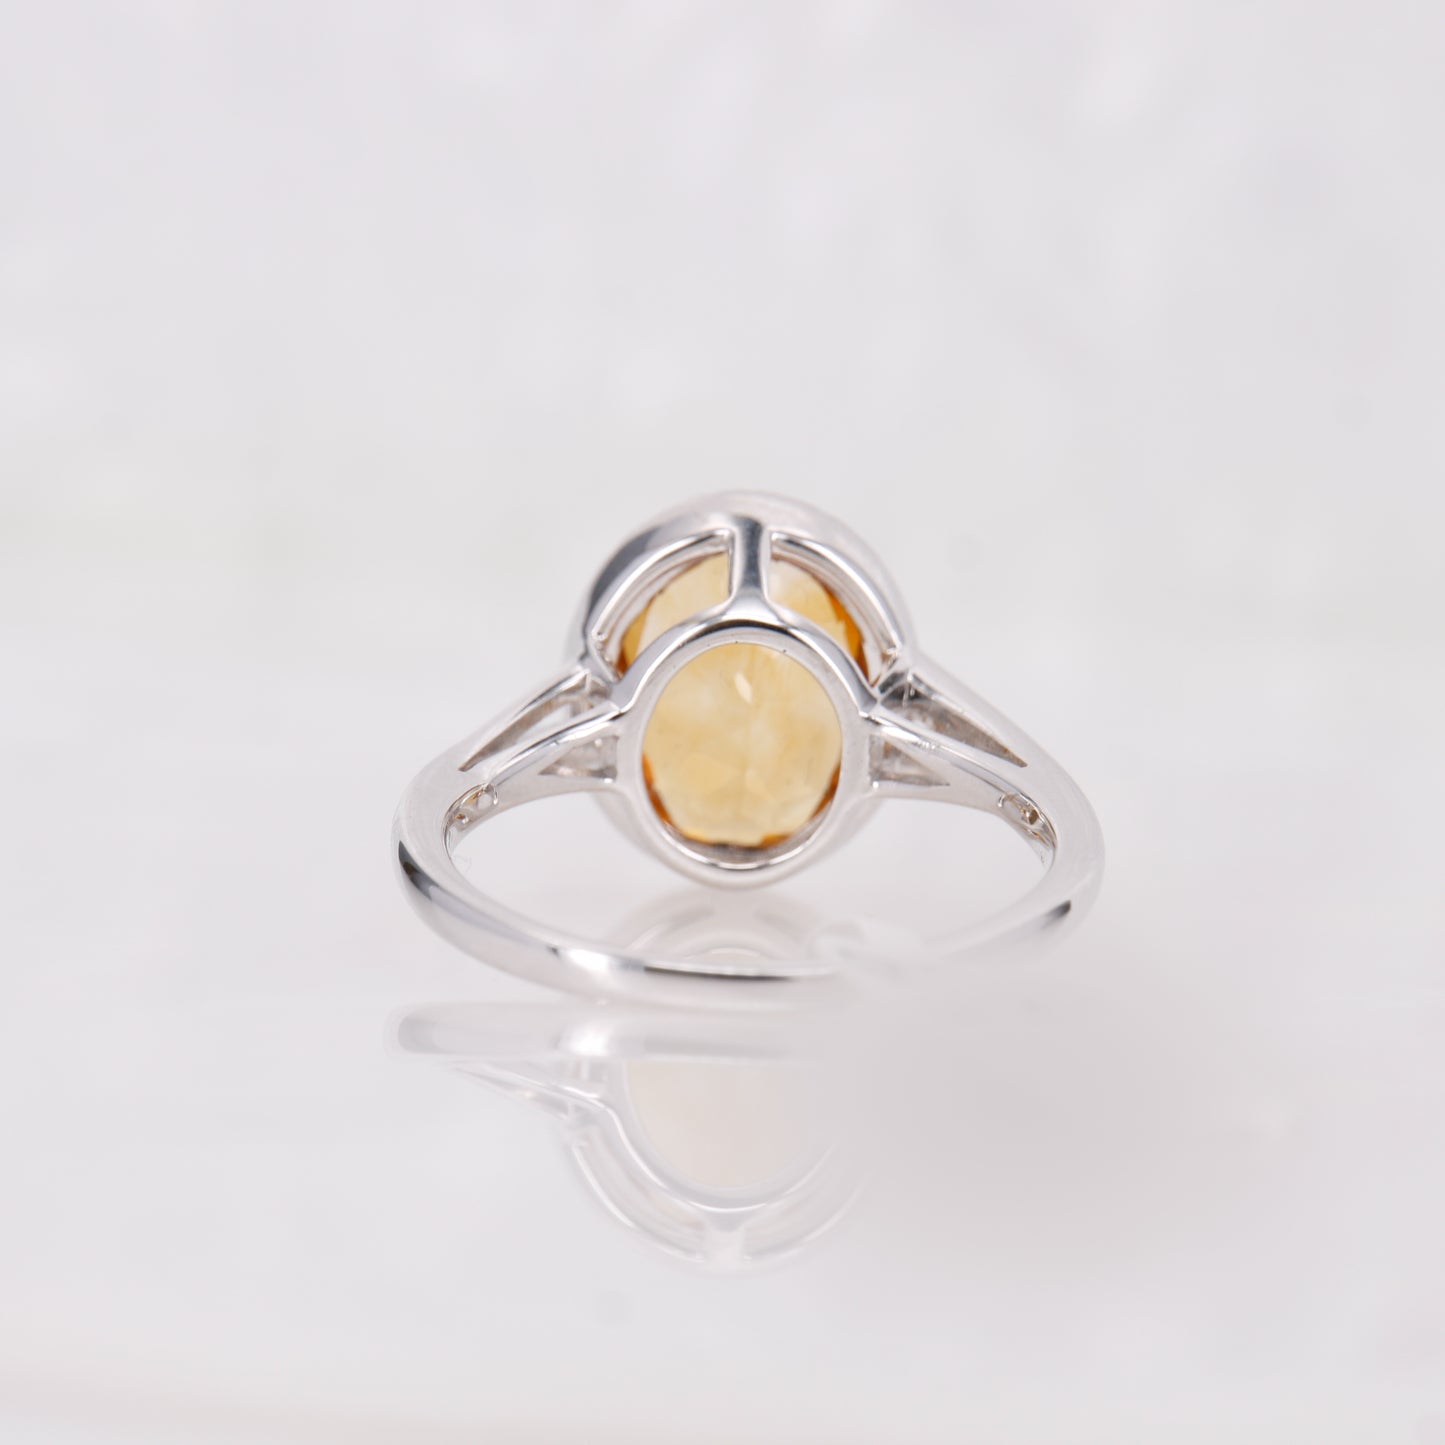 Citrine and Diamond ring set in 18ct white Gold. Oval cut citrine with a halo of diamonds 